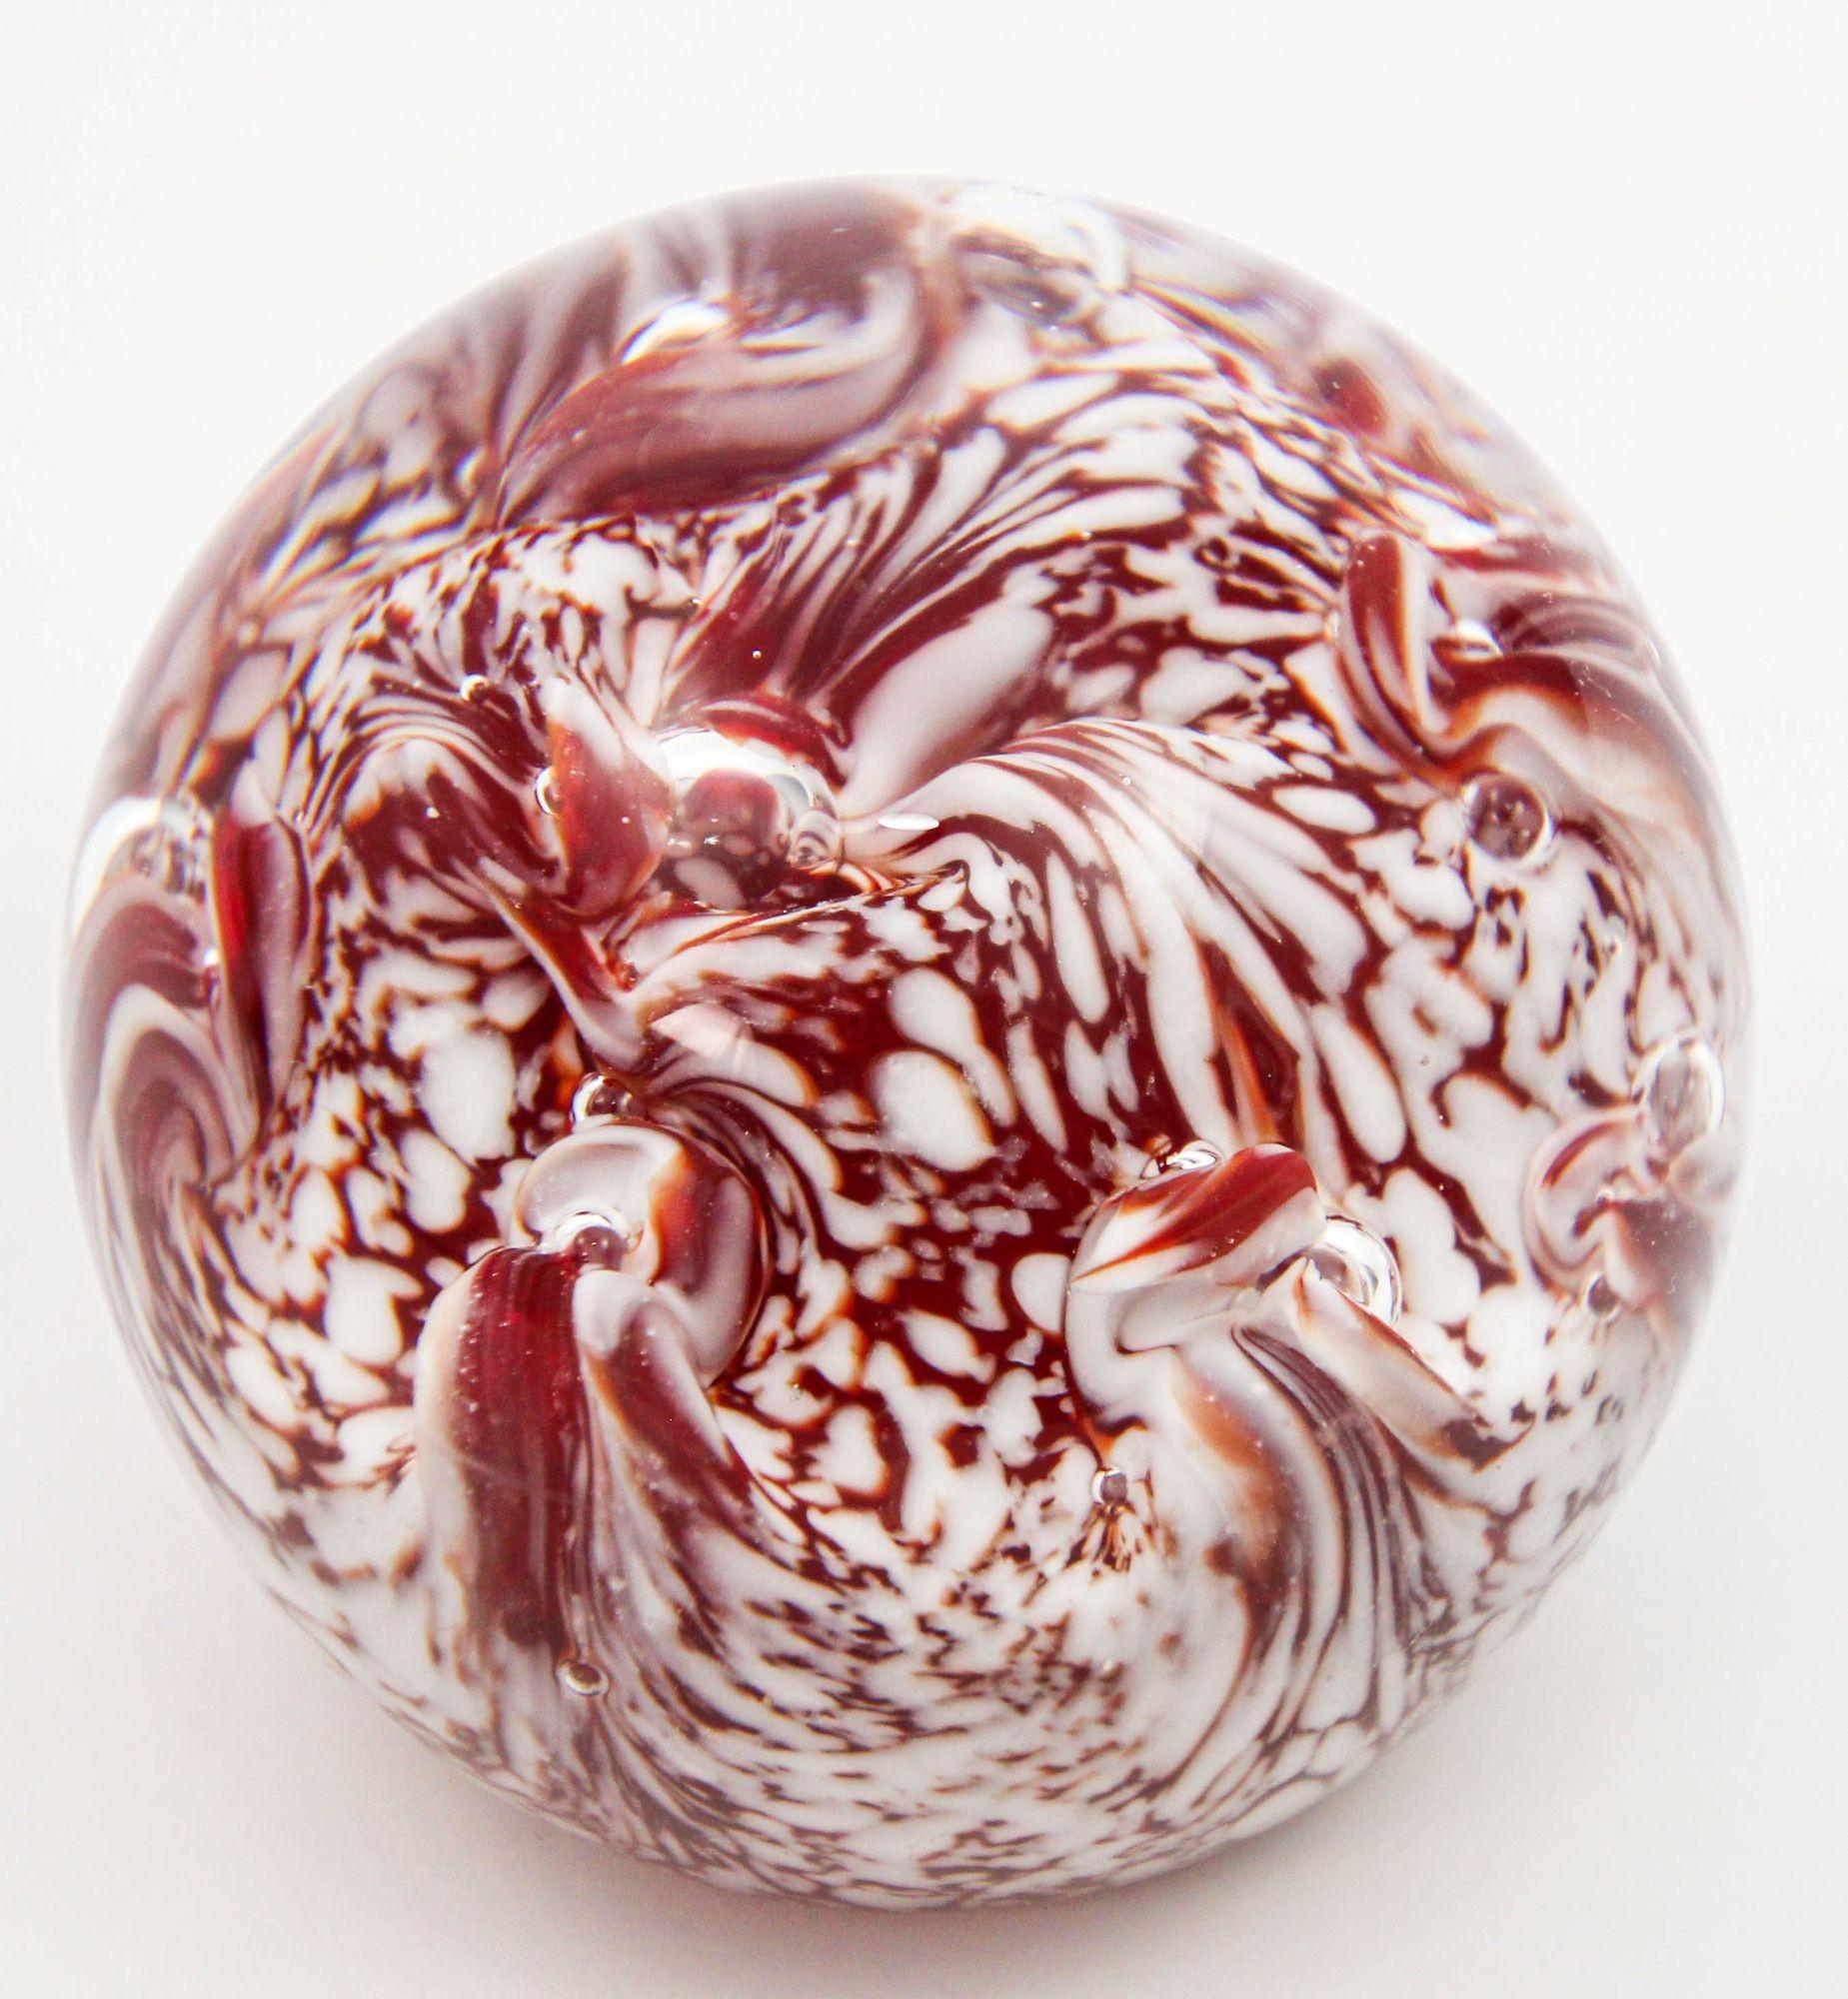 Vintage Crystal Art Glass Paperweight in Red and White Swirl Hungary 1960s For Sale 2